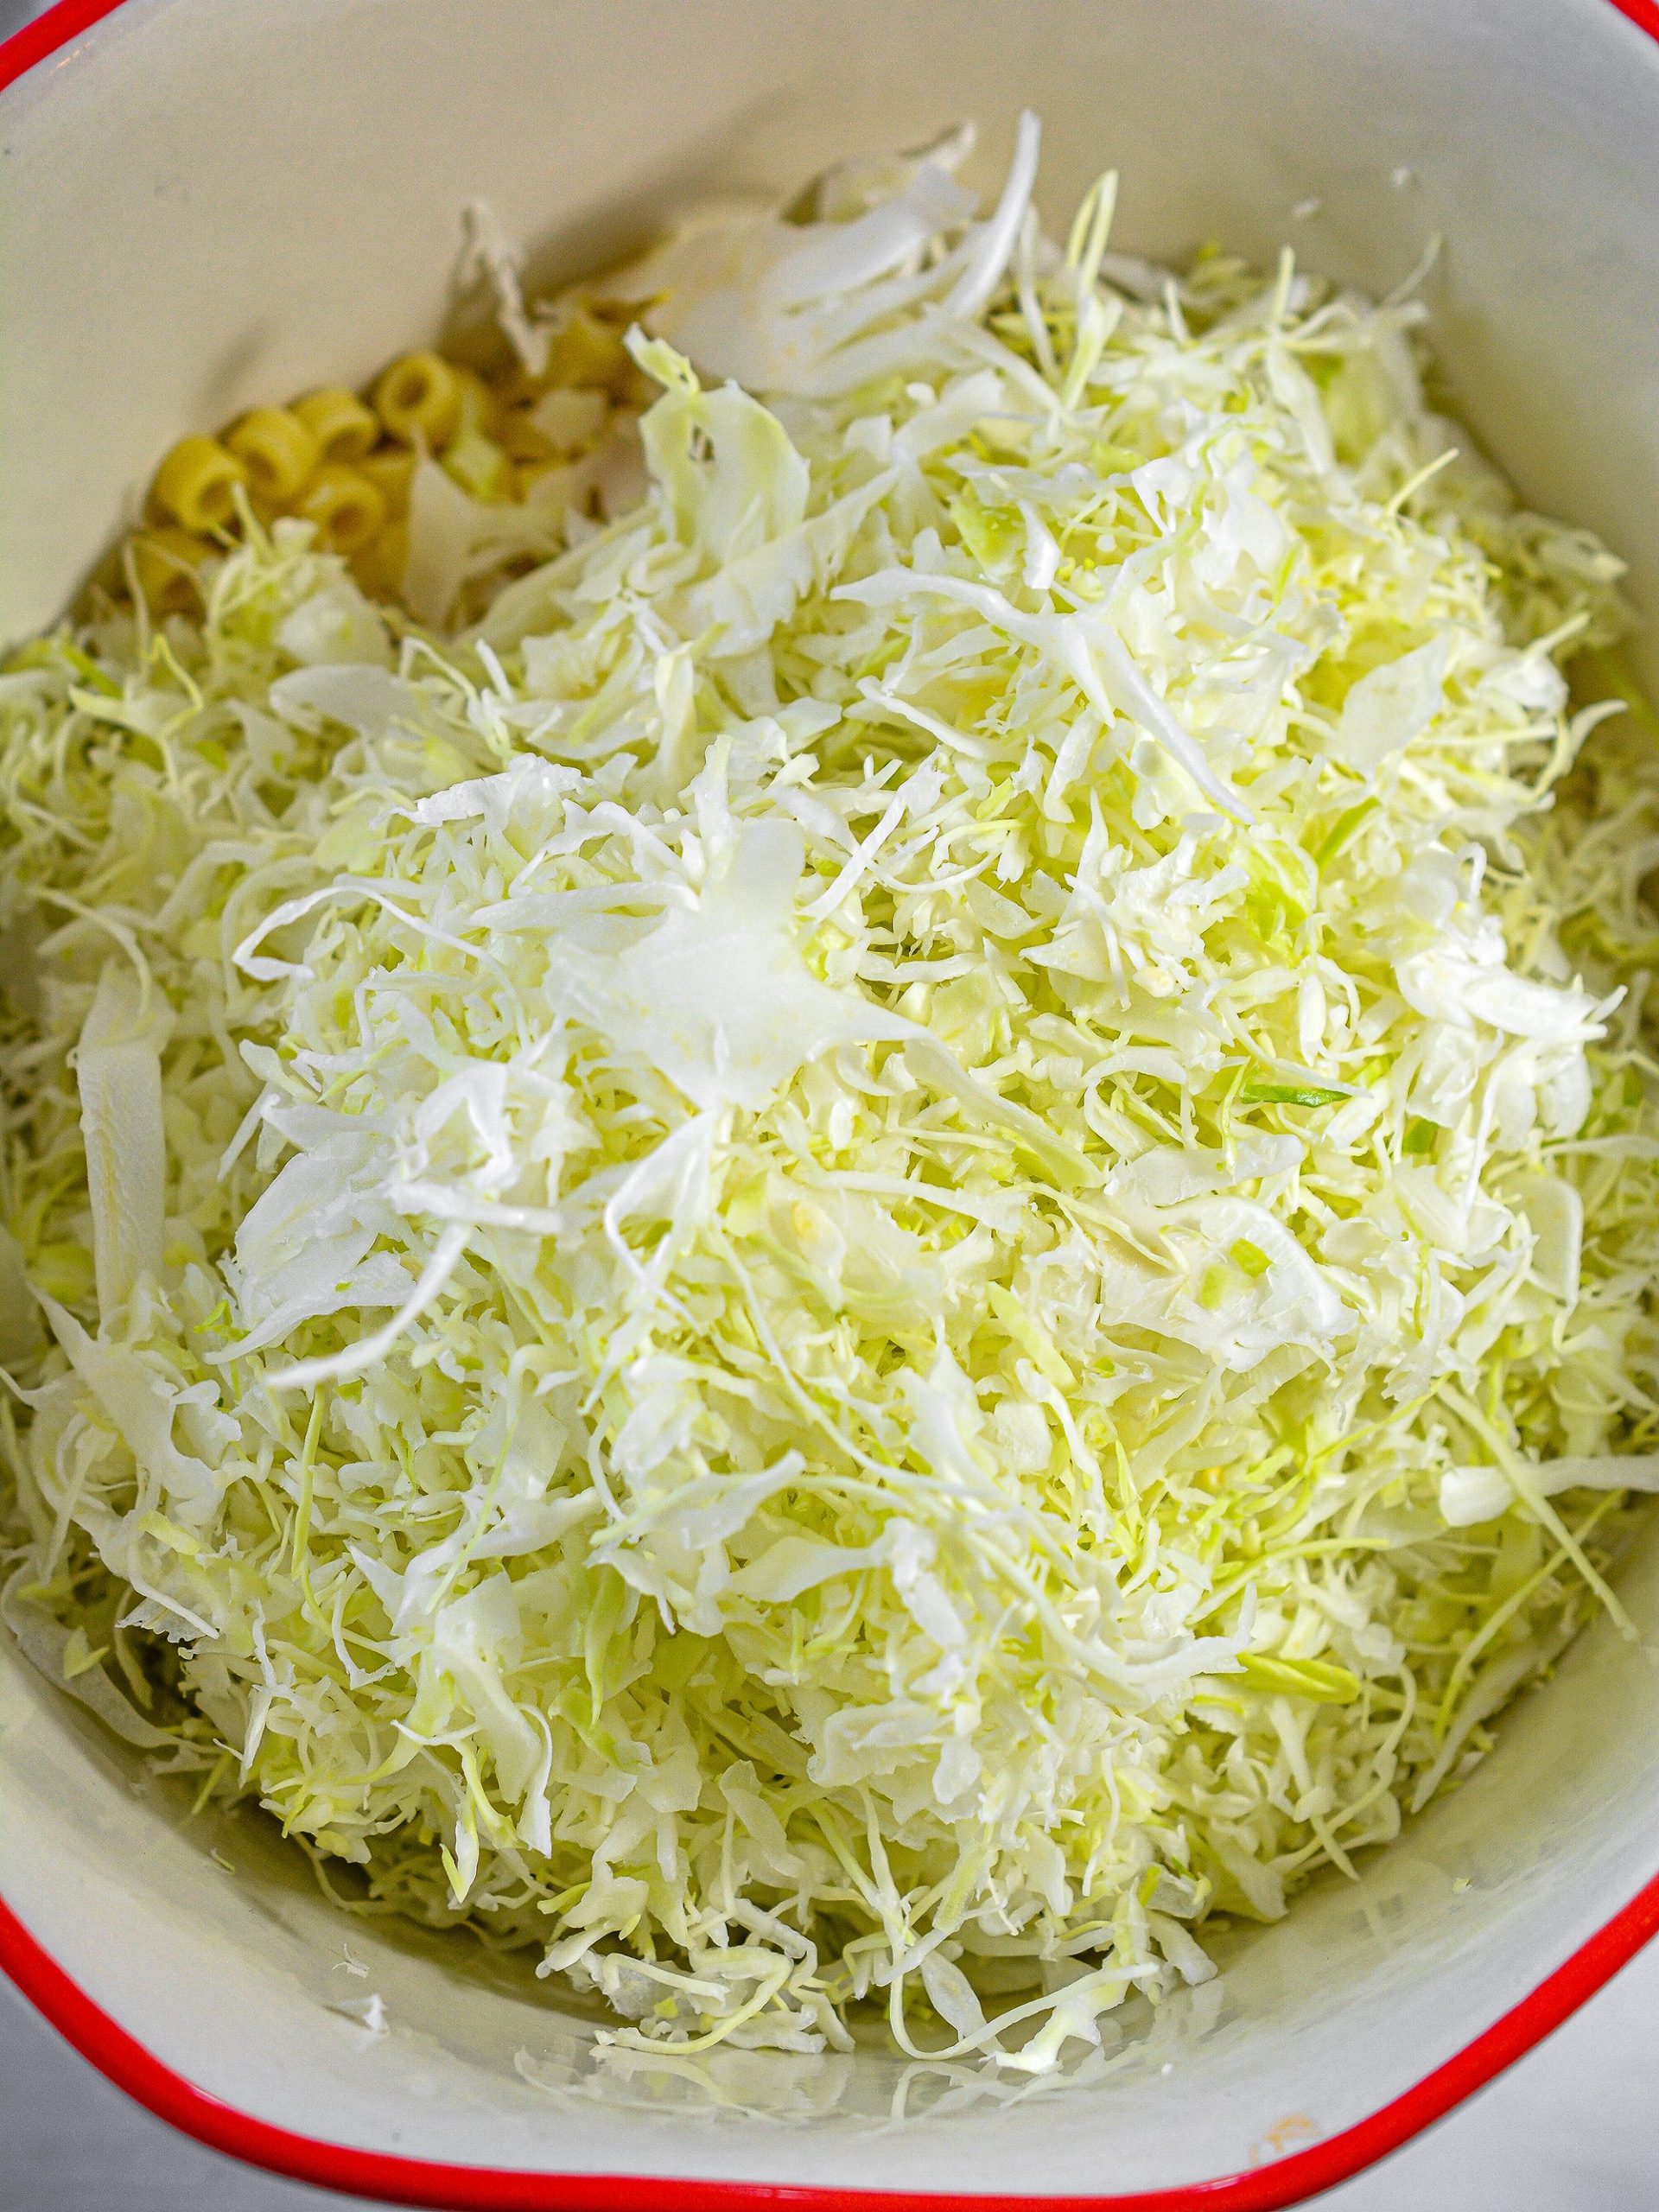 Then, add the shredded cabbage.